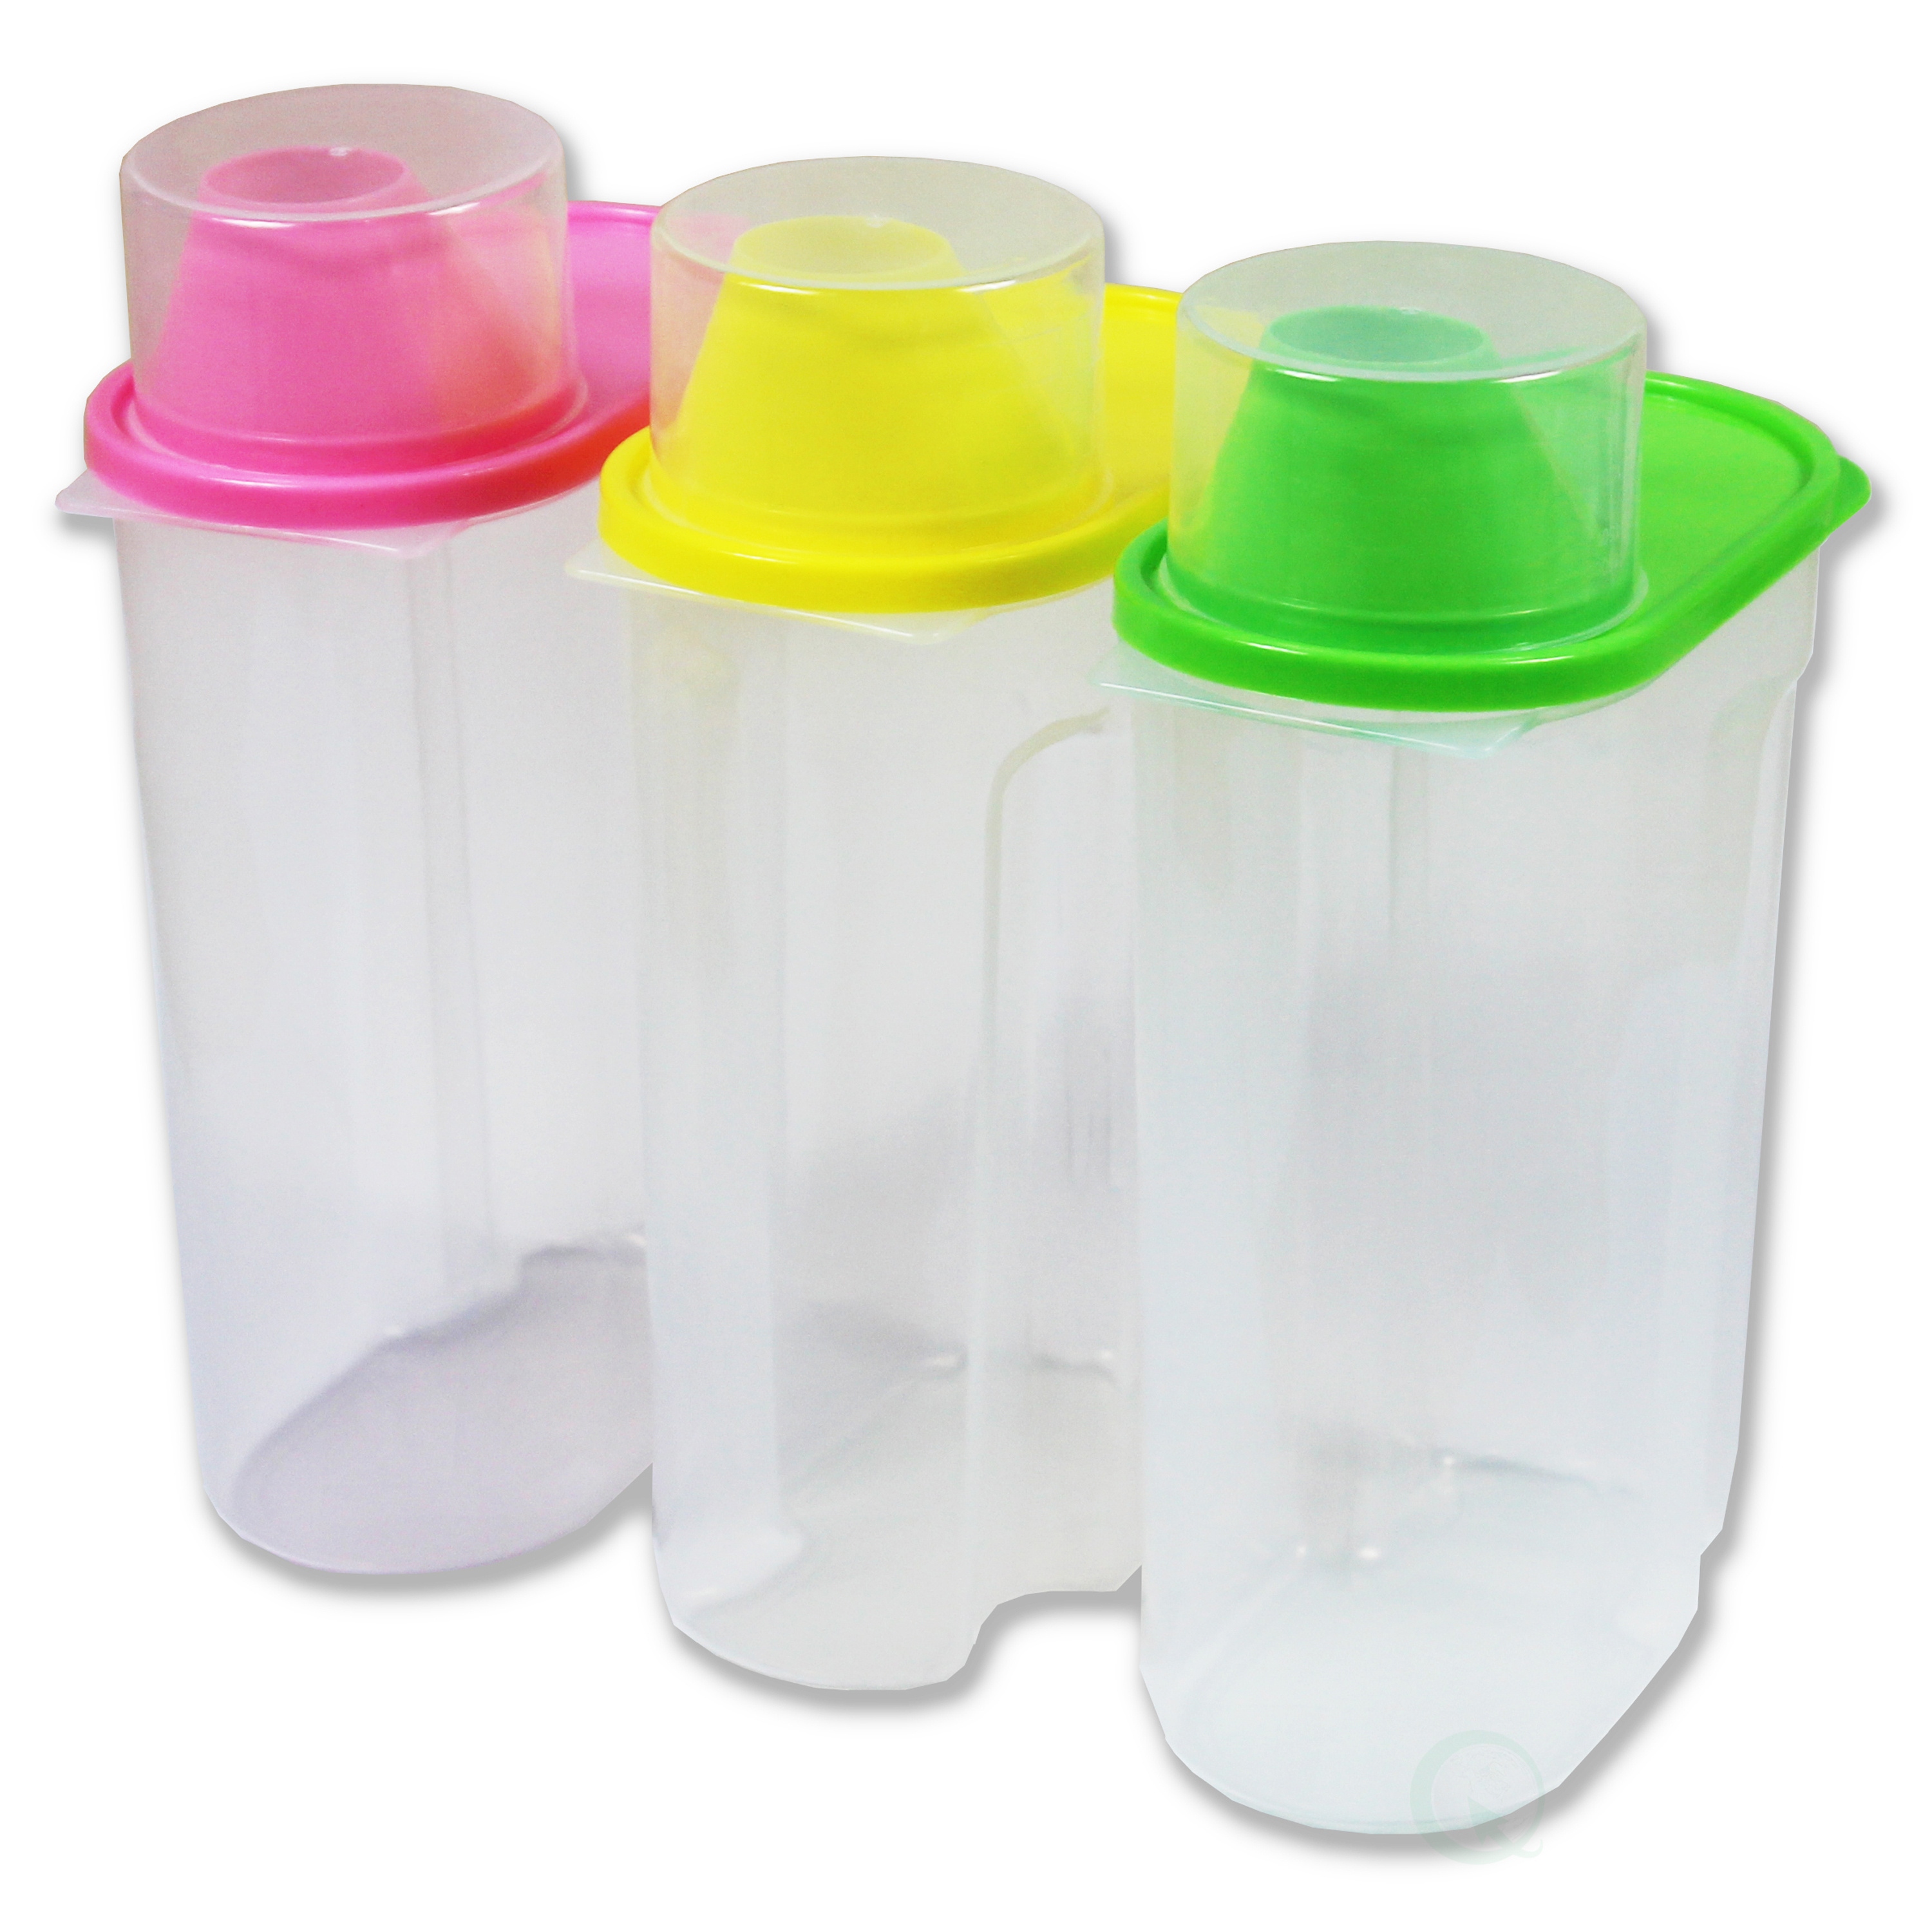 BPA-Free Plastic Food Saver-Kitchen Food Cereal Storage Containers With Graduated Cap - Set Of 6